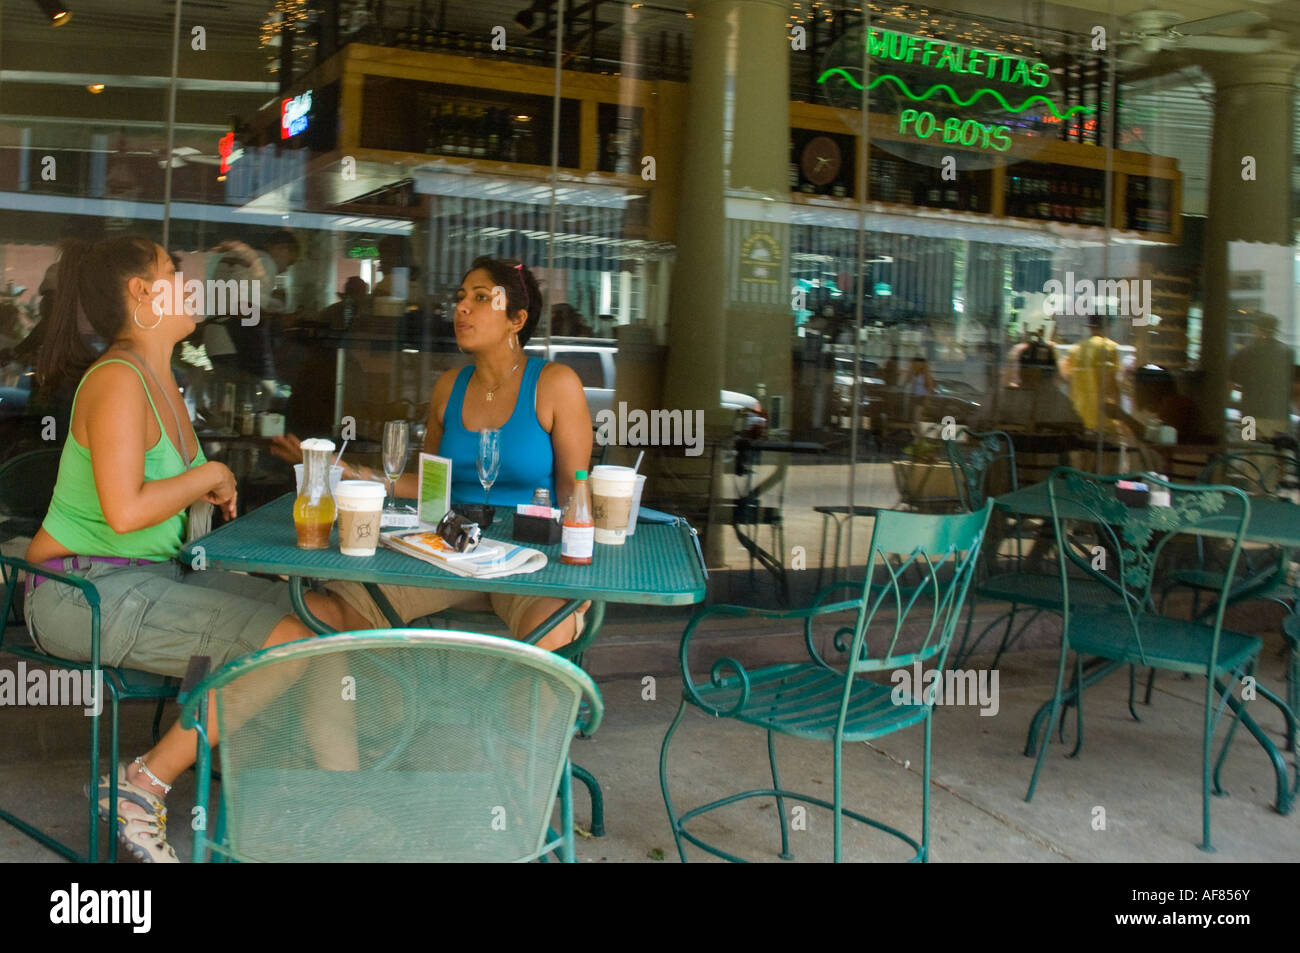 Two Young Women Seated at a Cafe Table Laughing in the French Quarter. New Orleans, Louisiana, USA Stock Photo